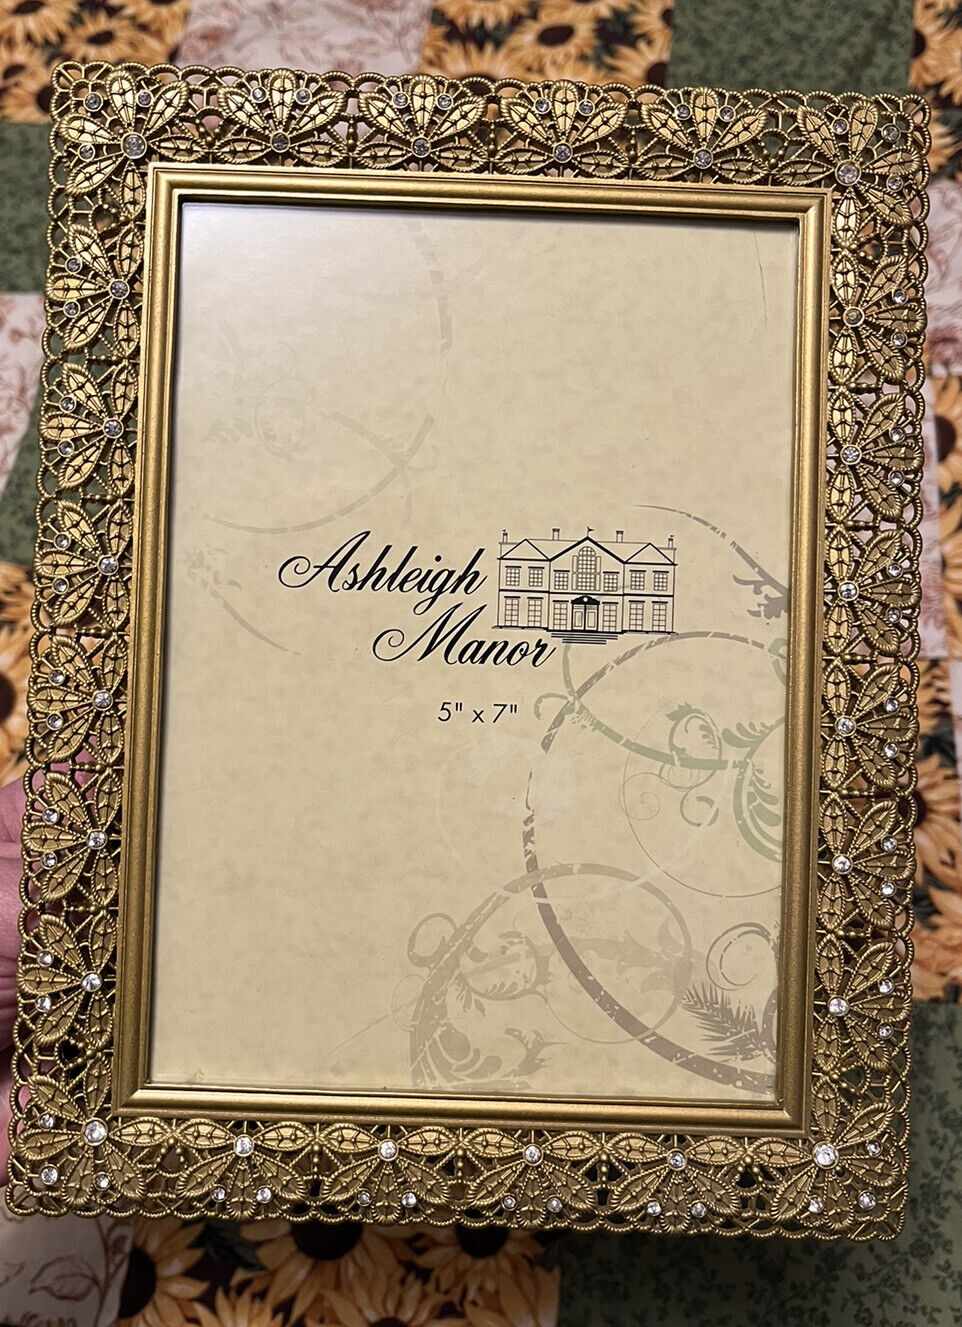 Ashleigh Manor Gold Tone Ornate Floral Frame 5” by 7”